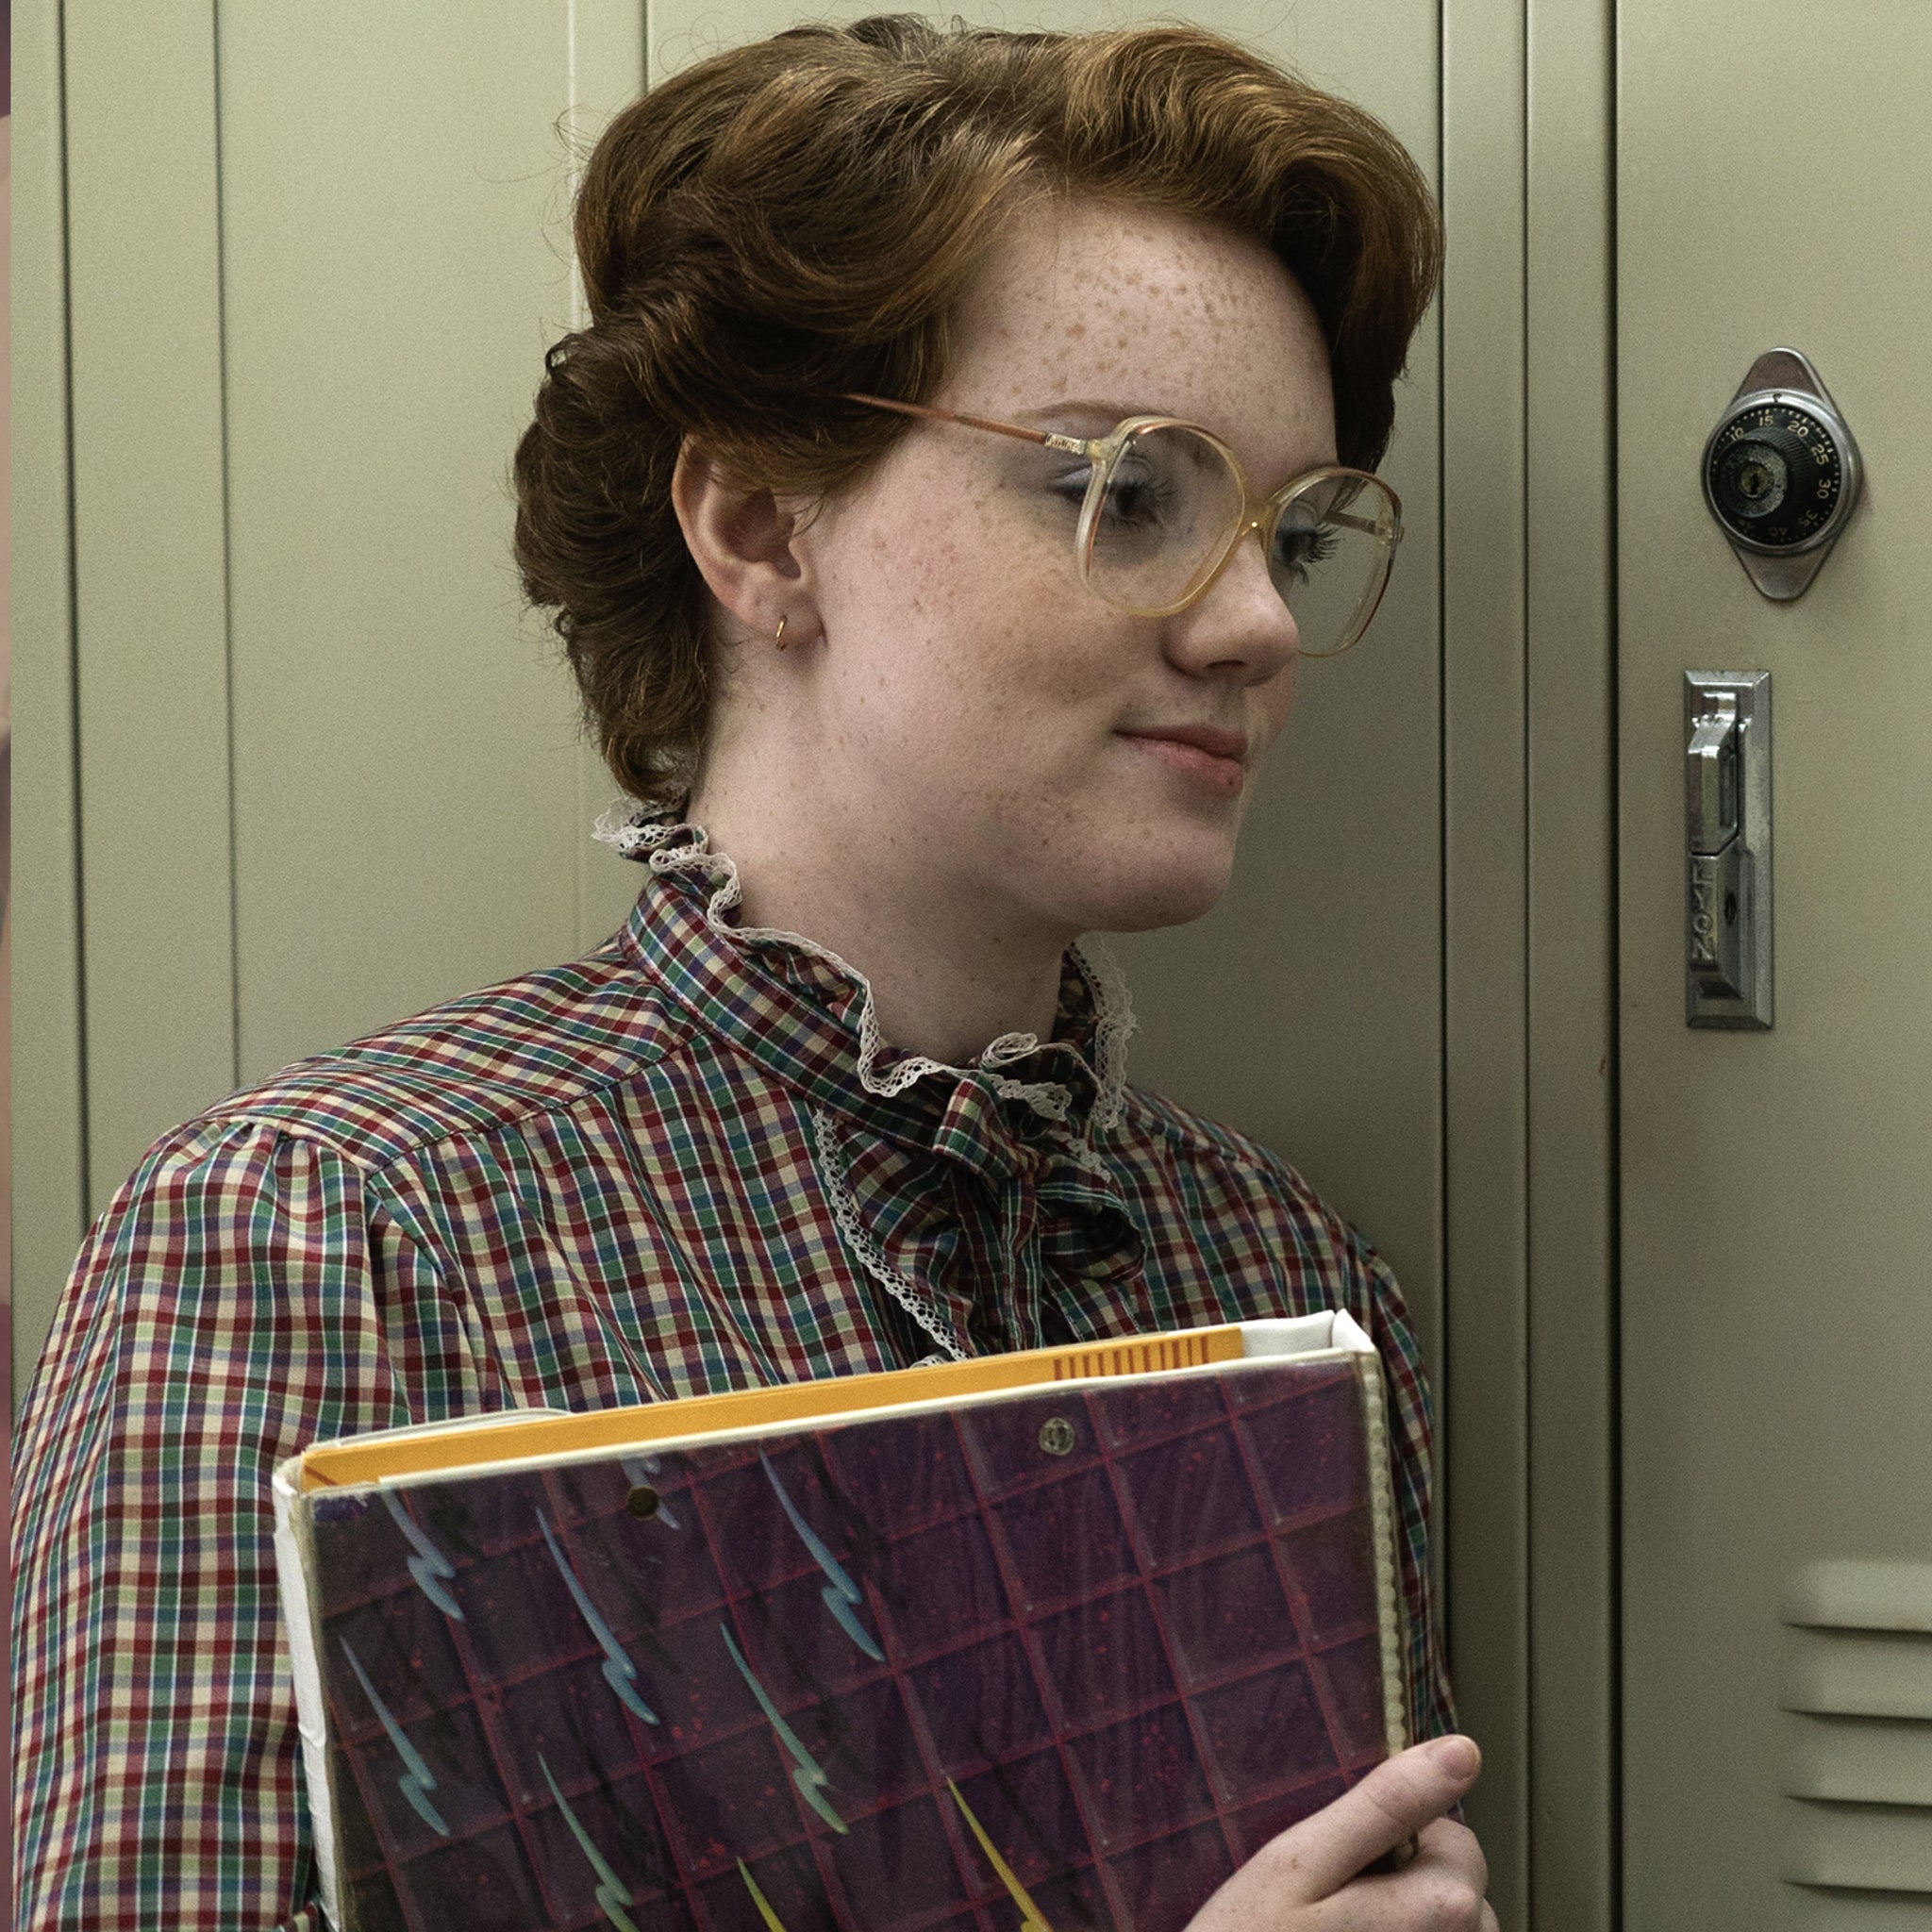 Stranger Things' Star Shannon Purser Reacts to Emmy Nom and